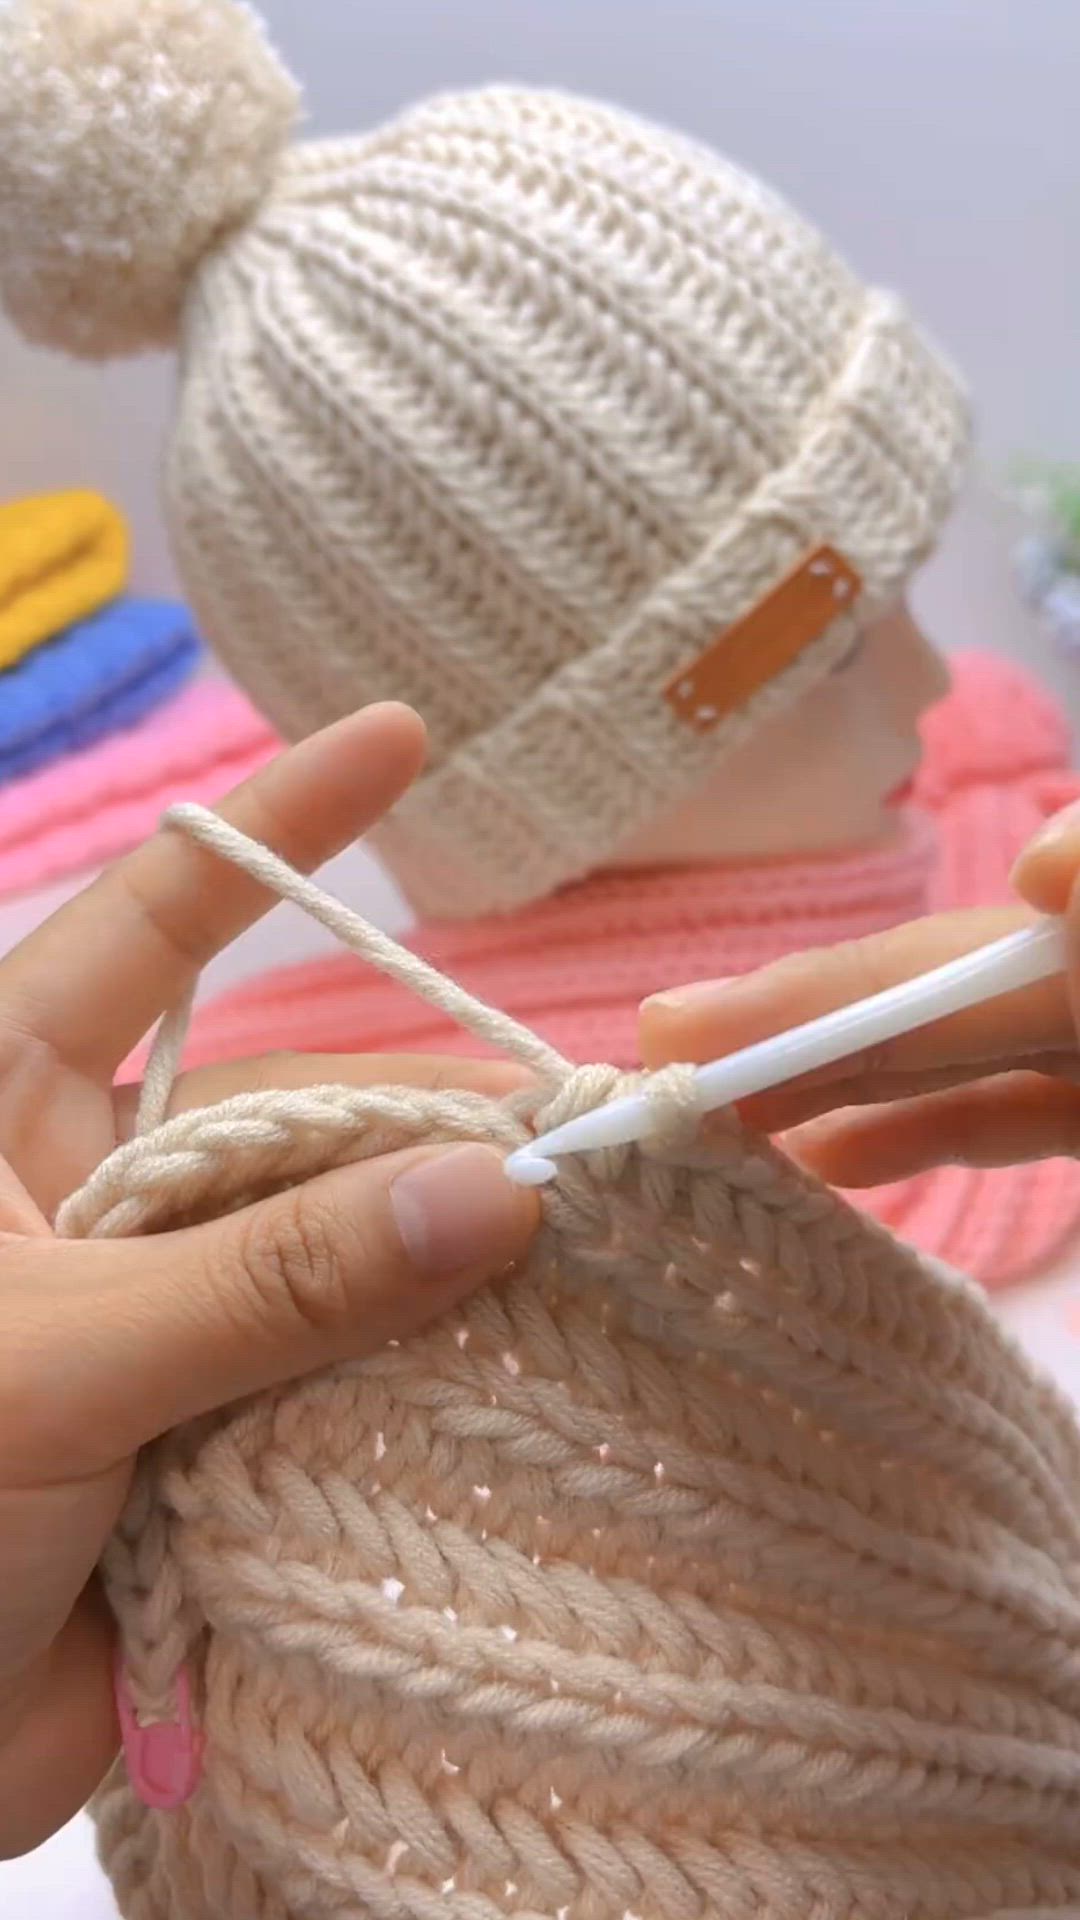 This contains: Craft a sweet baby hat with a free tutorial from @woolenmiracle.0313 on TikTok